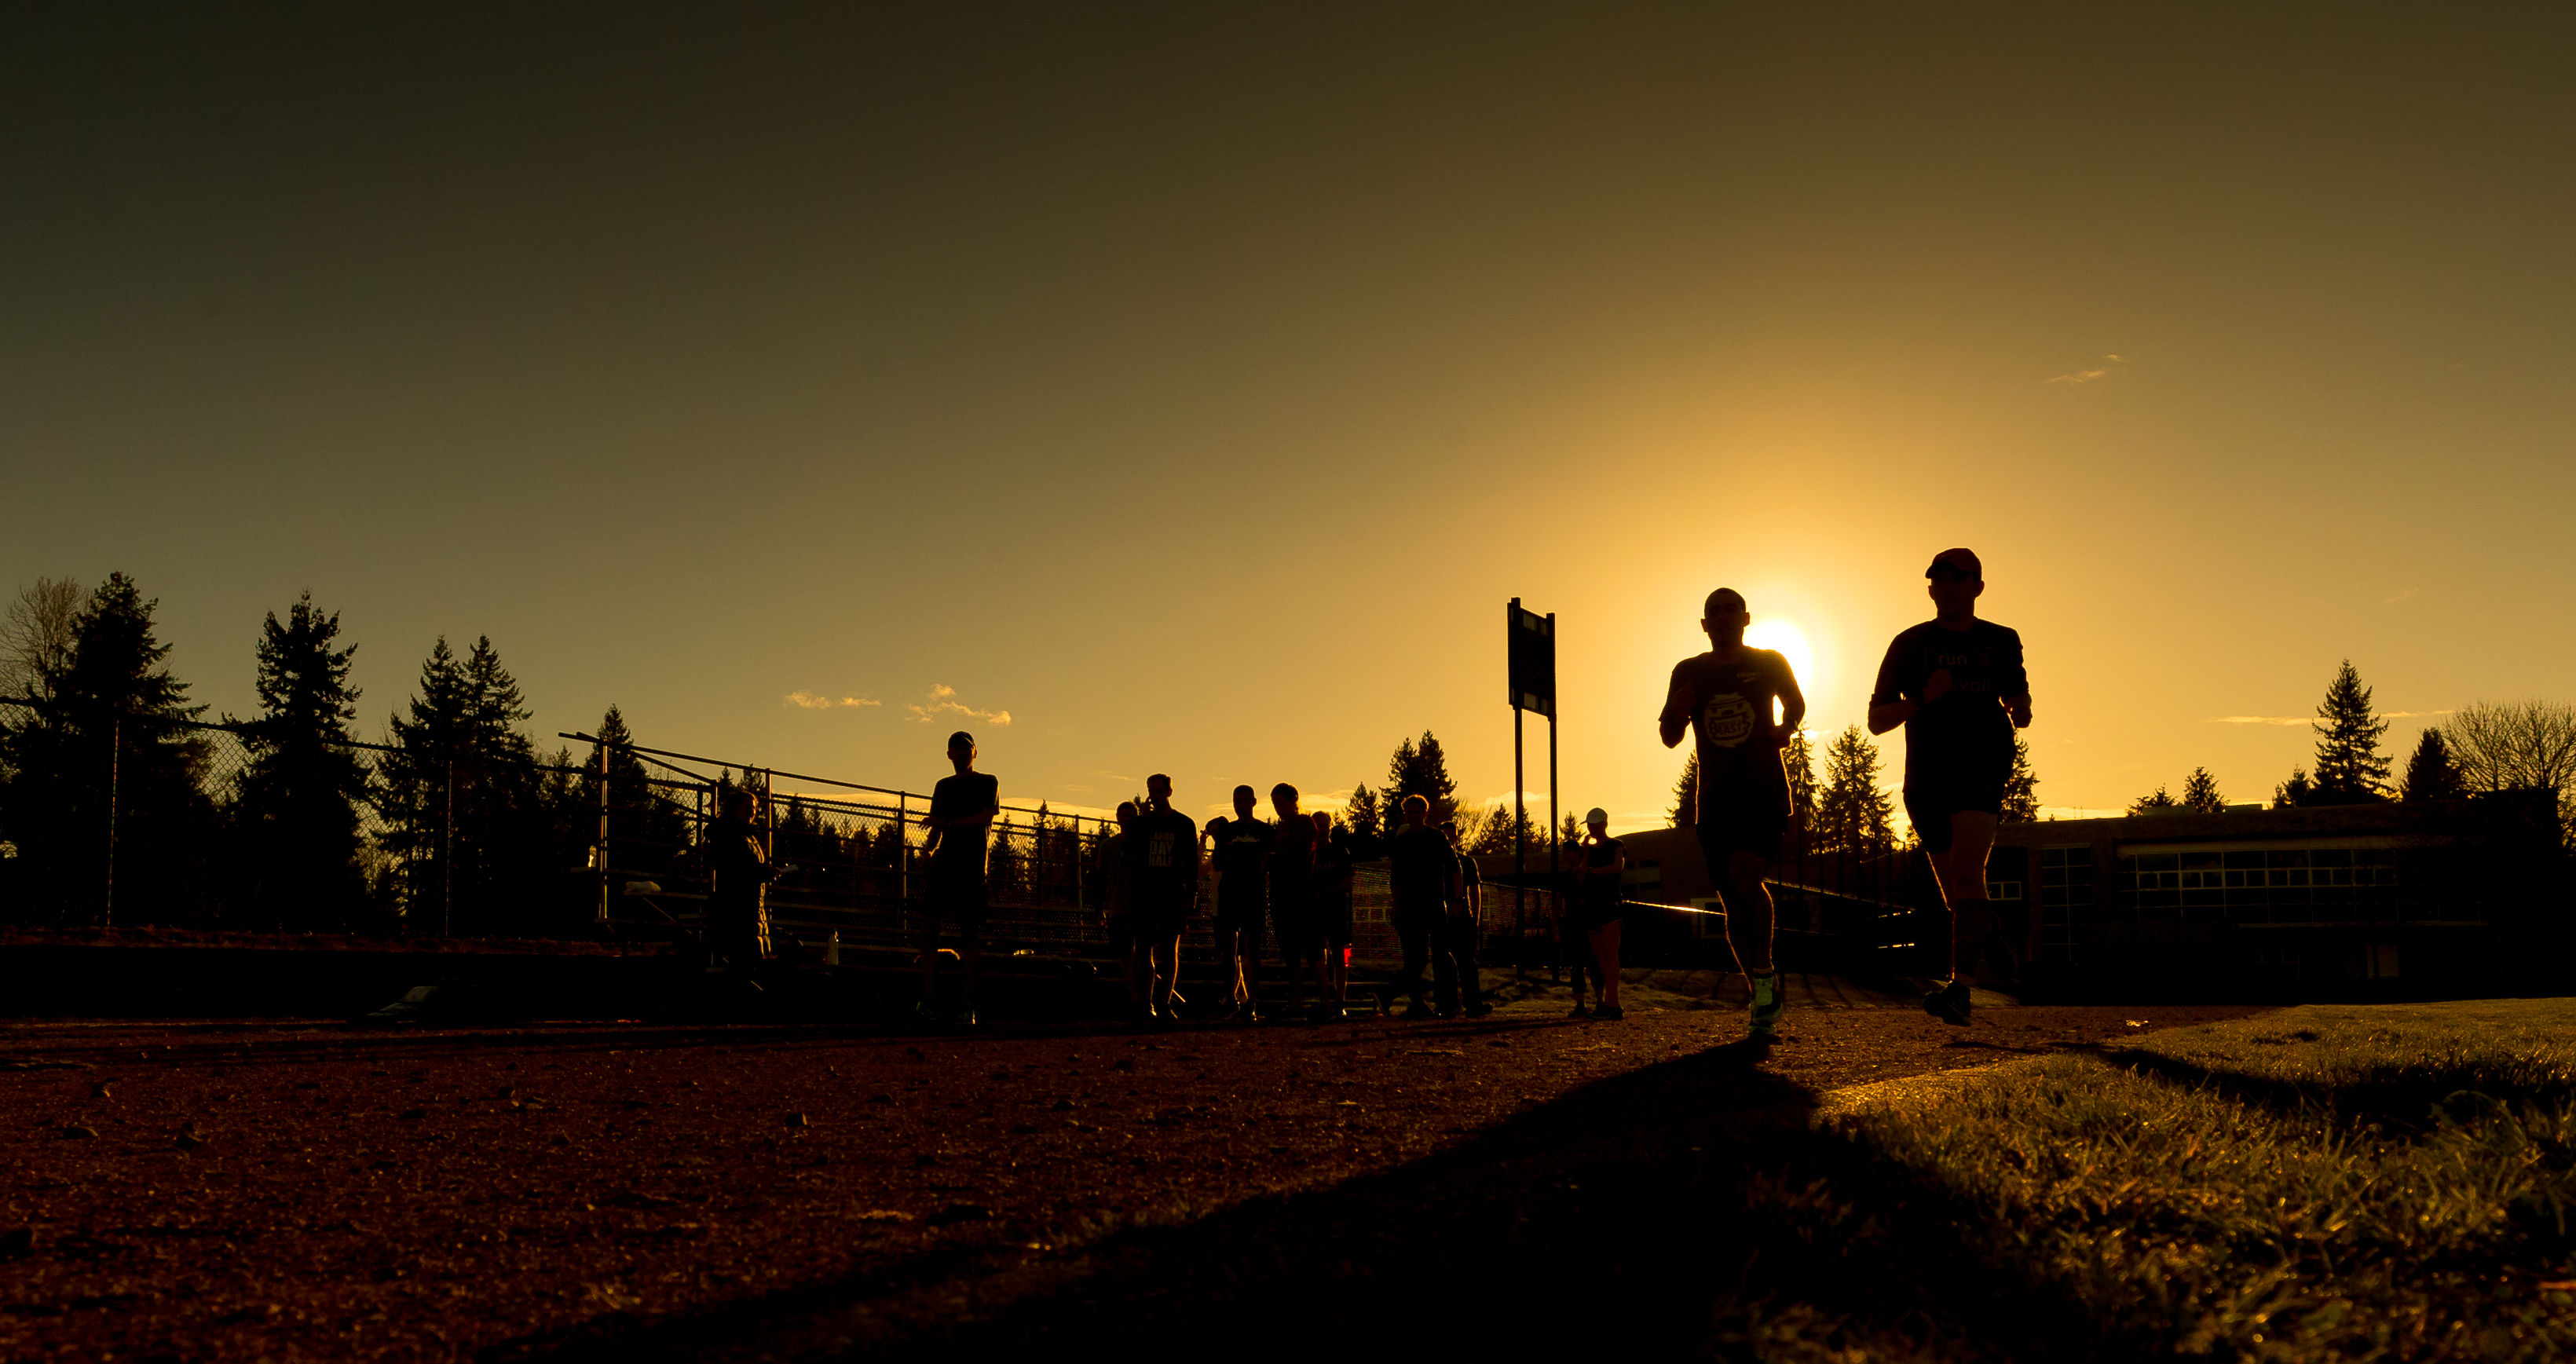 photo showing shadows of two men running together into the golden light of the setting sun